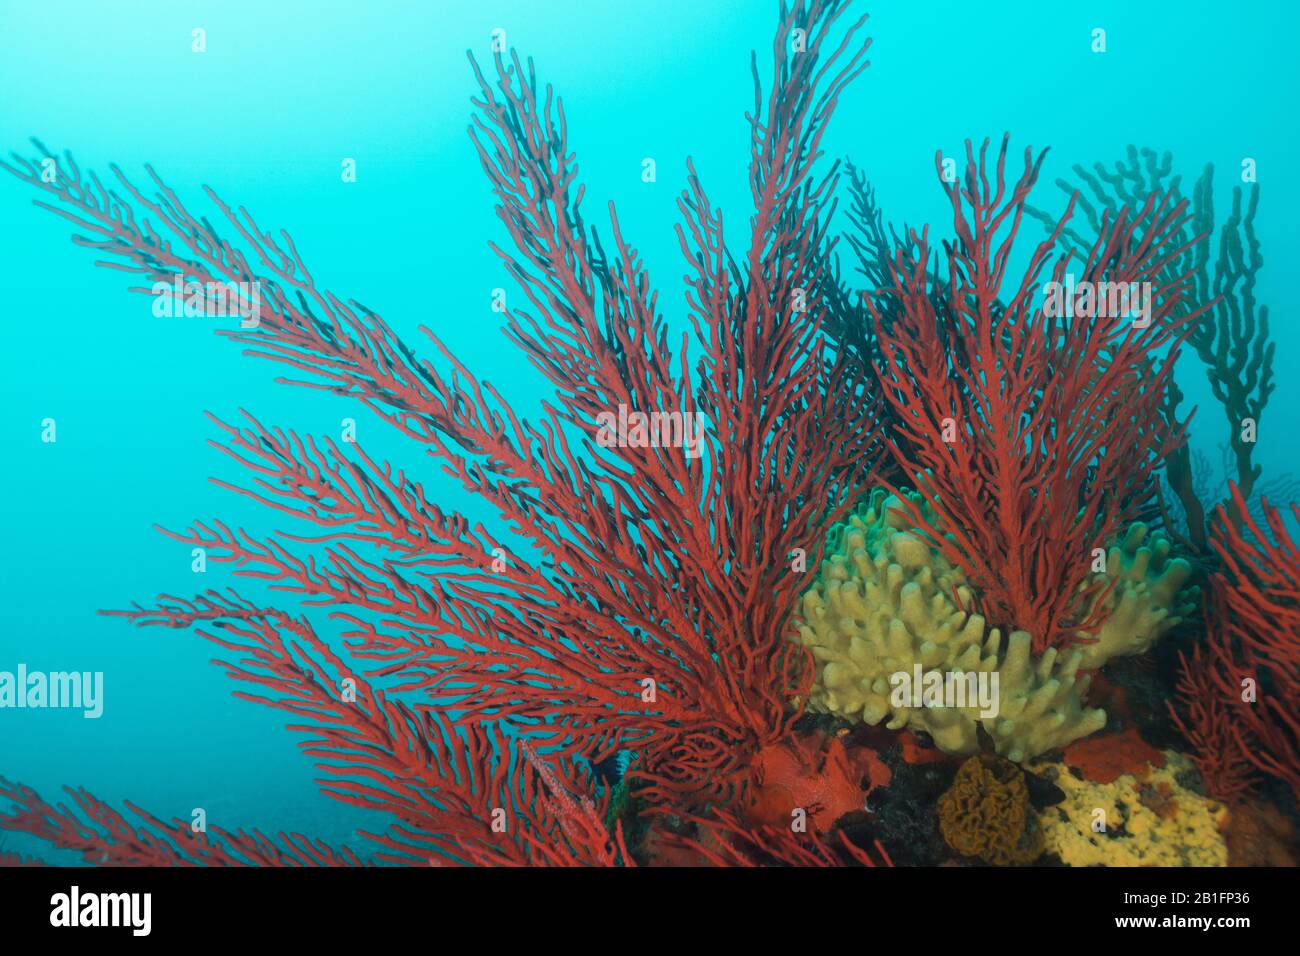 Large red Palmate sea fans (Leptogoria palma) covering a rock. Stock Photo